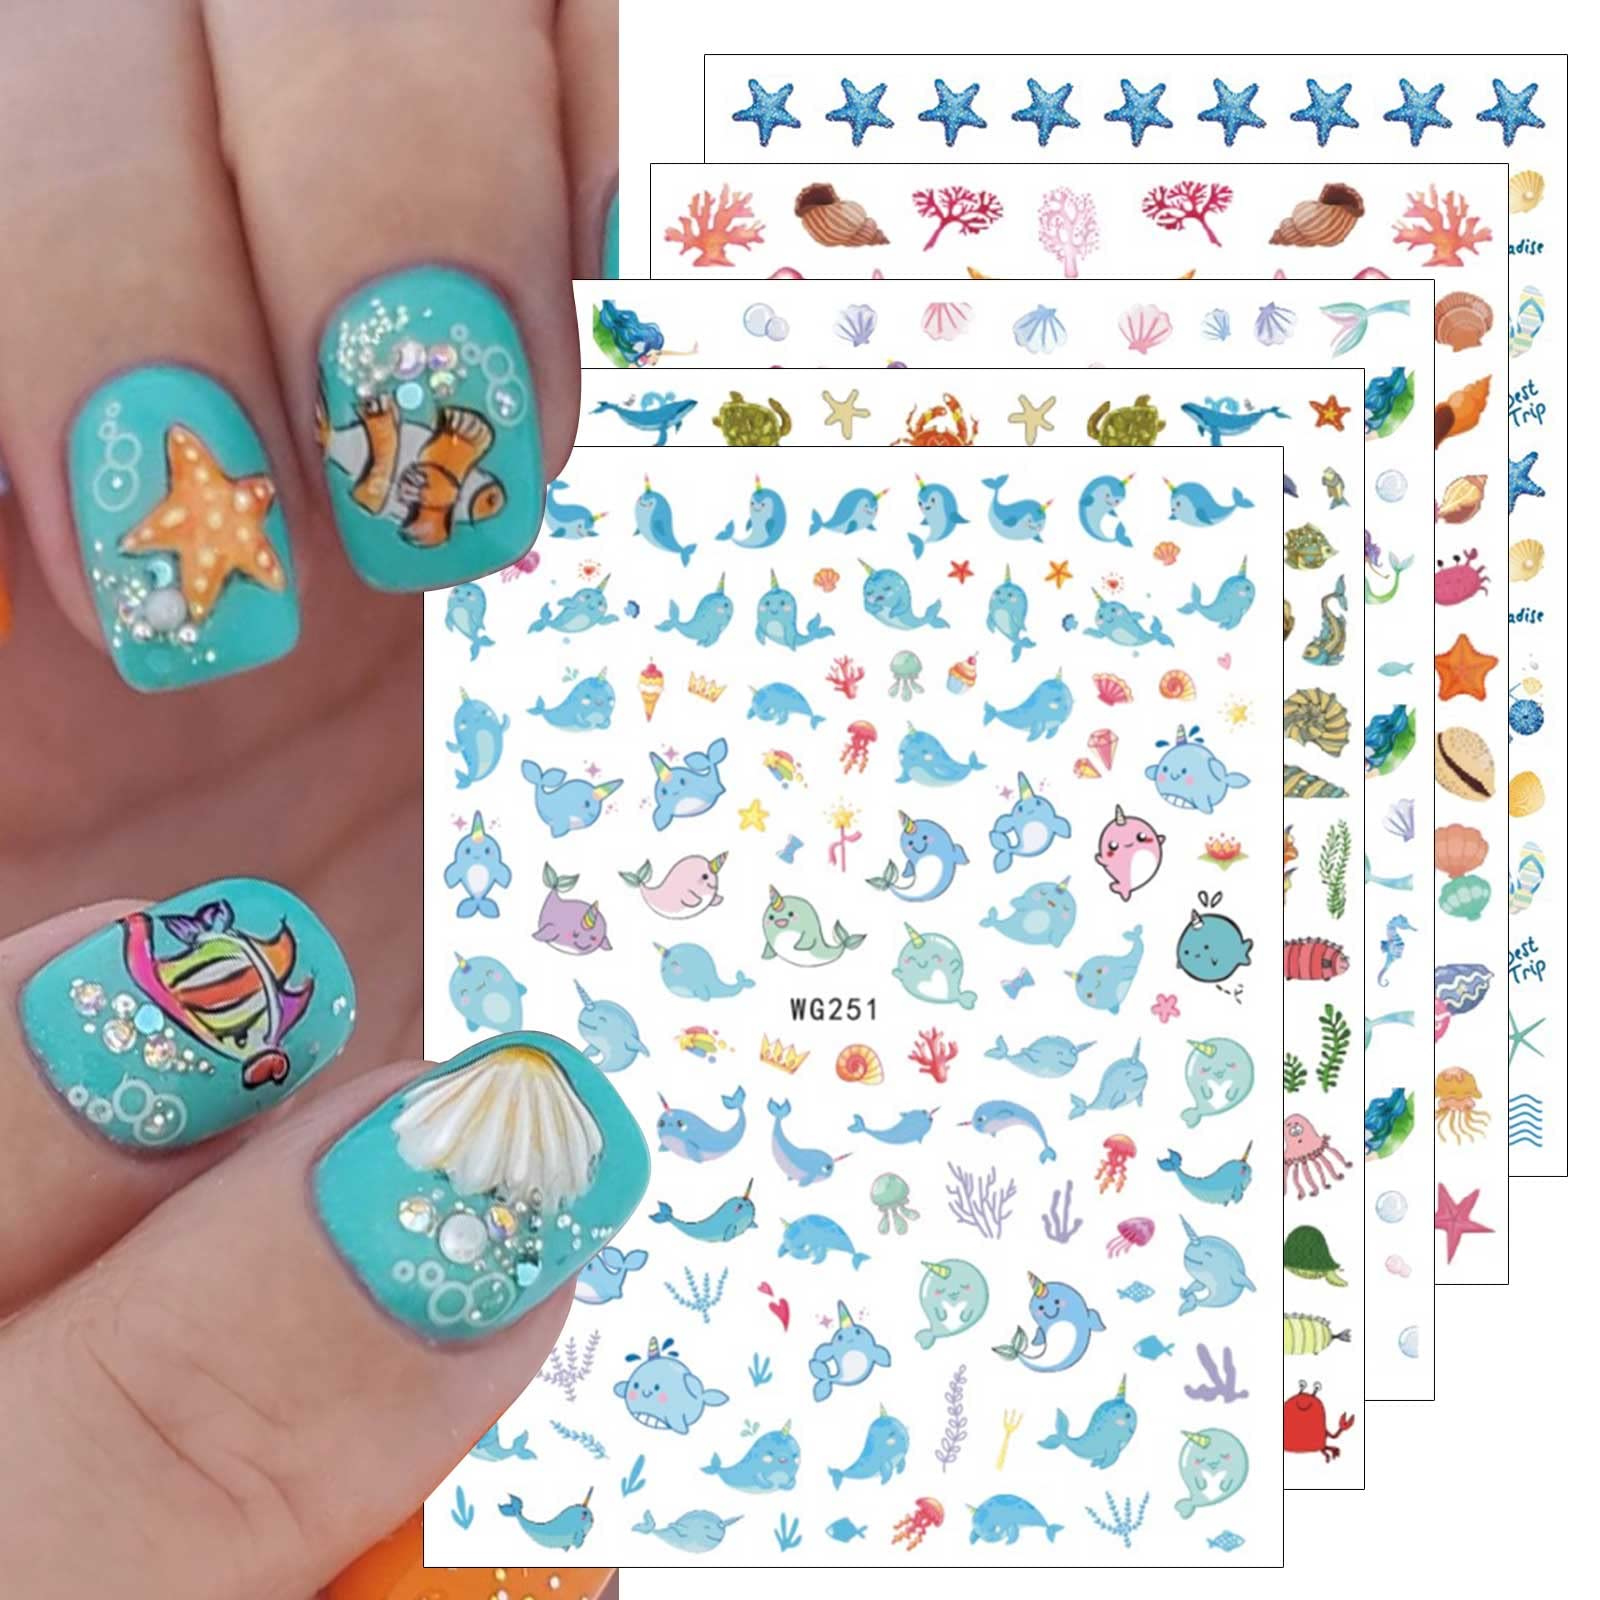 FULL BEAUTY 3D Holographic Plant Ocean Nail Sticker T2704 | LookHealthyStore